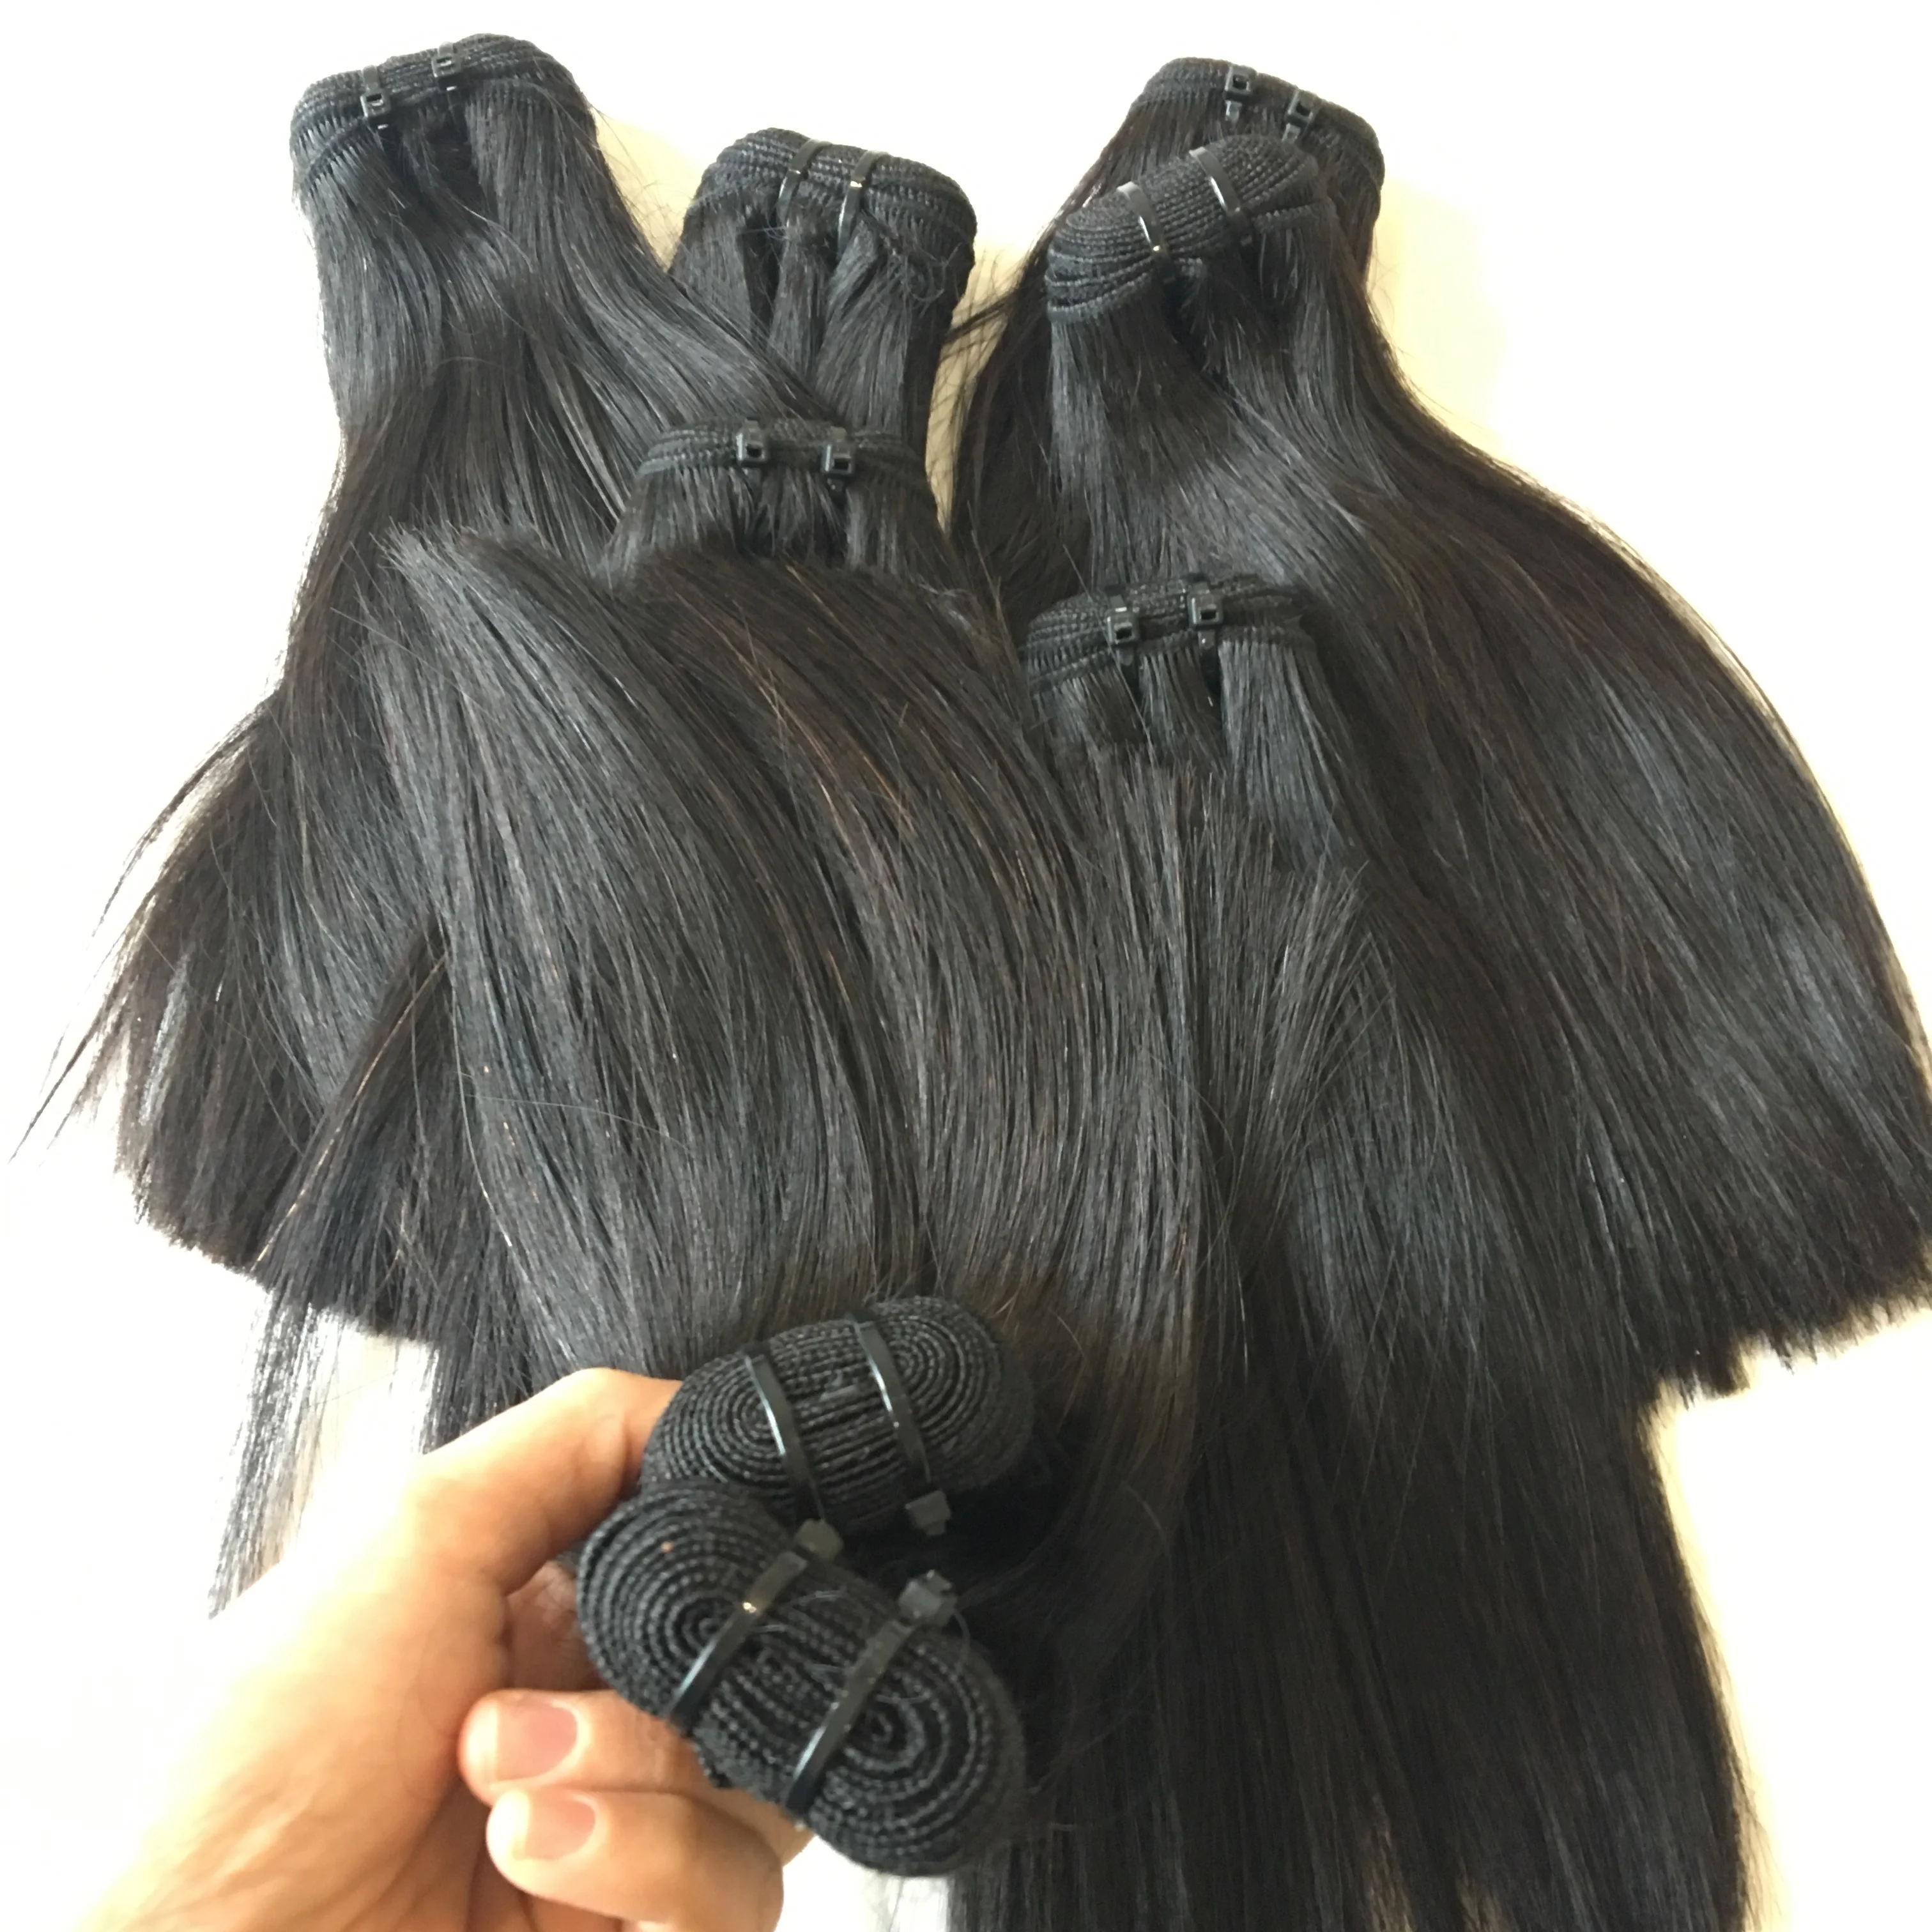 Bone Straight Grade 9a Virgin Russian Hair Wigs Extensions 8-inch Silky  Human Vietnam Natural Color Real Hair For Sale - Buy Hair,Brazilian Hair,Bone  Straight Product on 